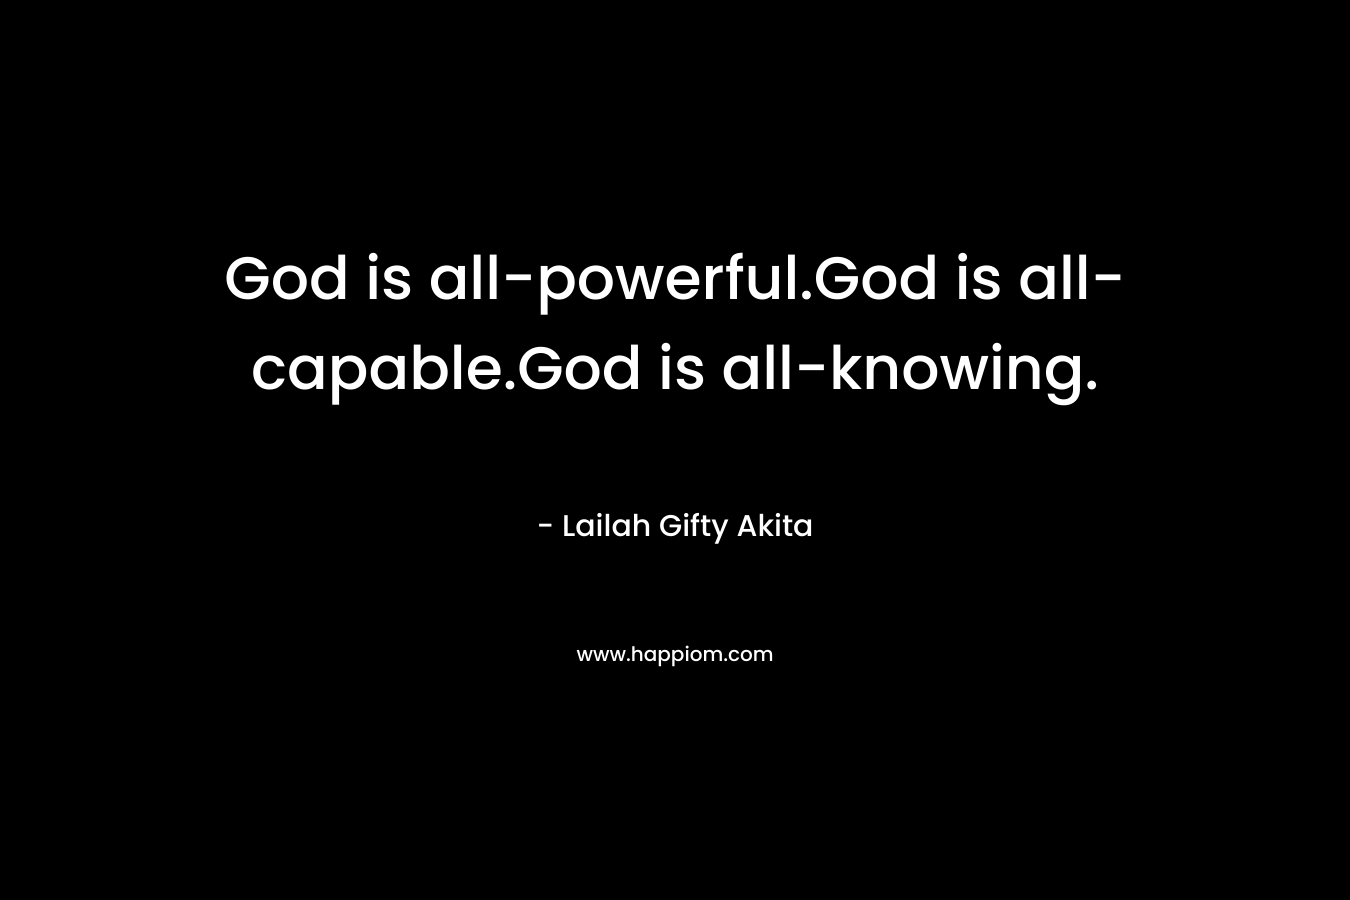 God is all-powerful.God is all-capable.God is all-knowing.